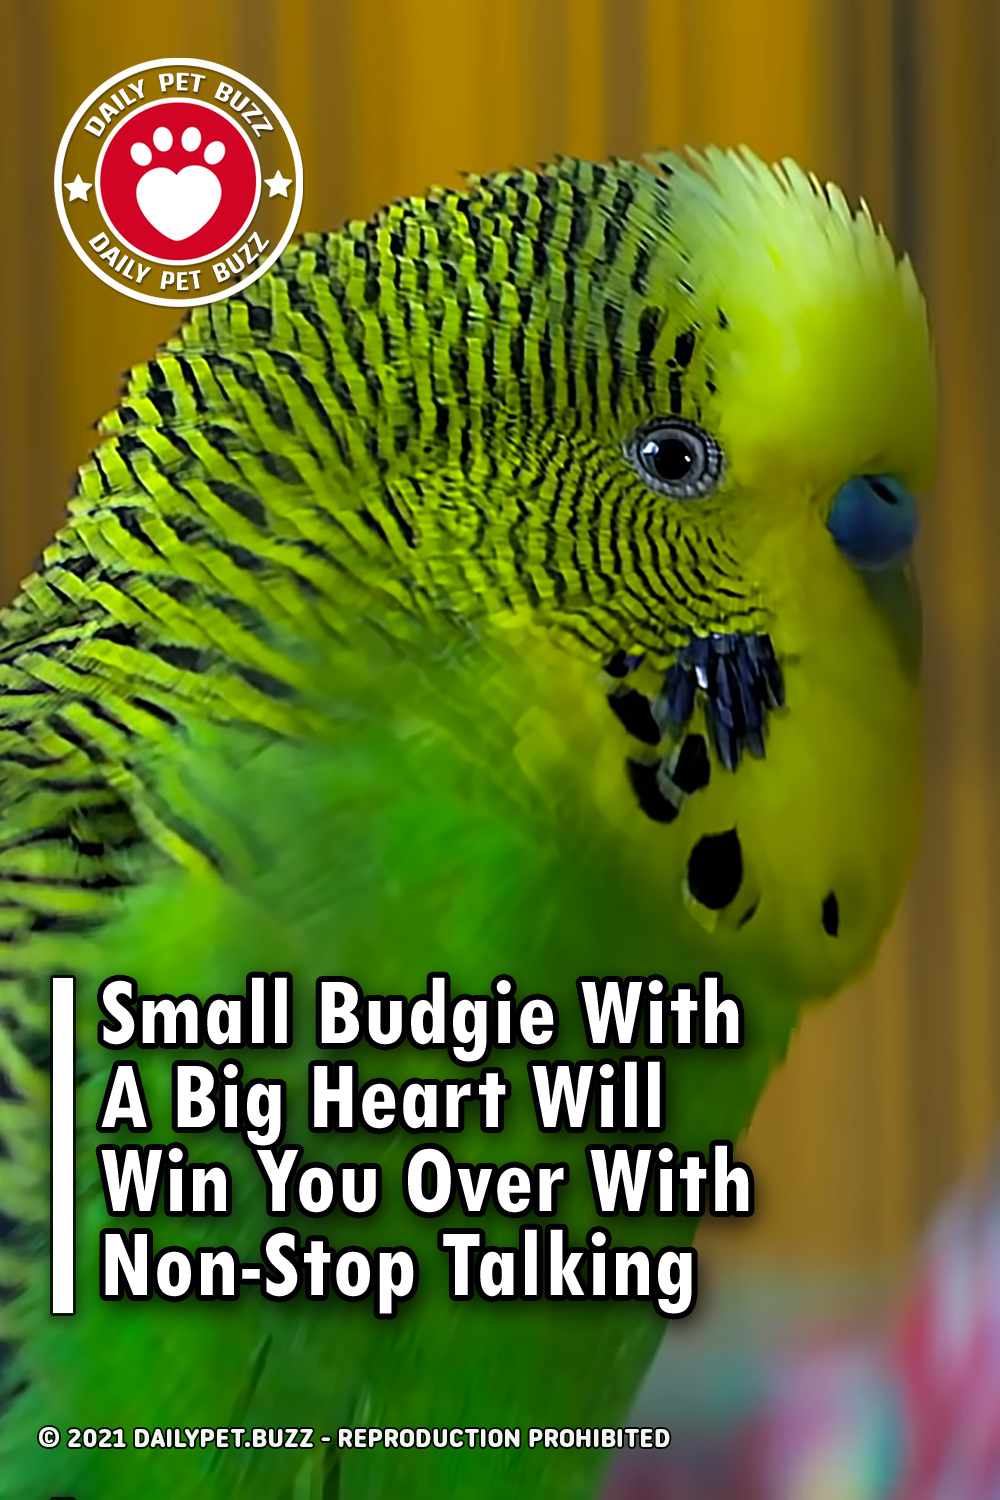 Small Budgie With A Big Heart Will Win You Over With Non-Stop Talking